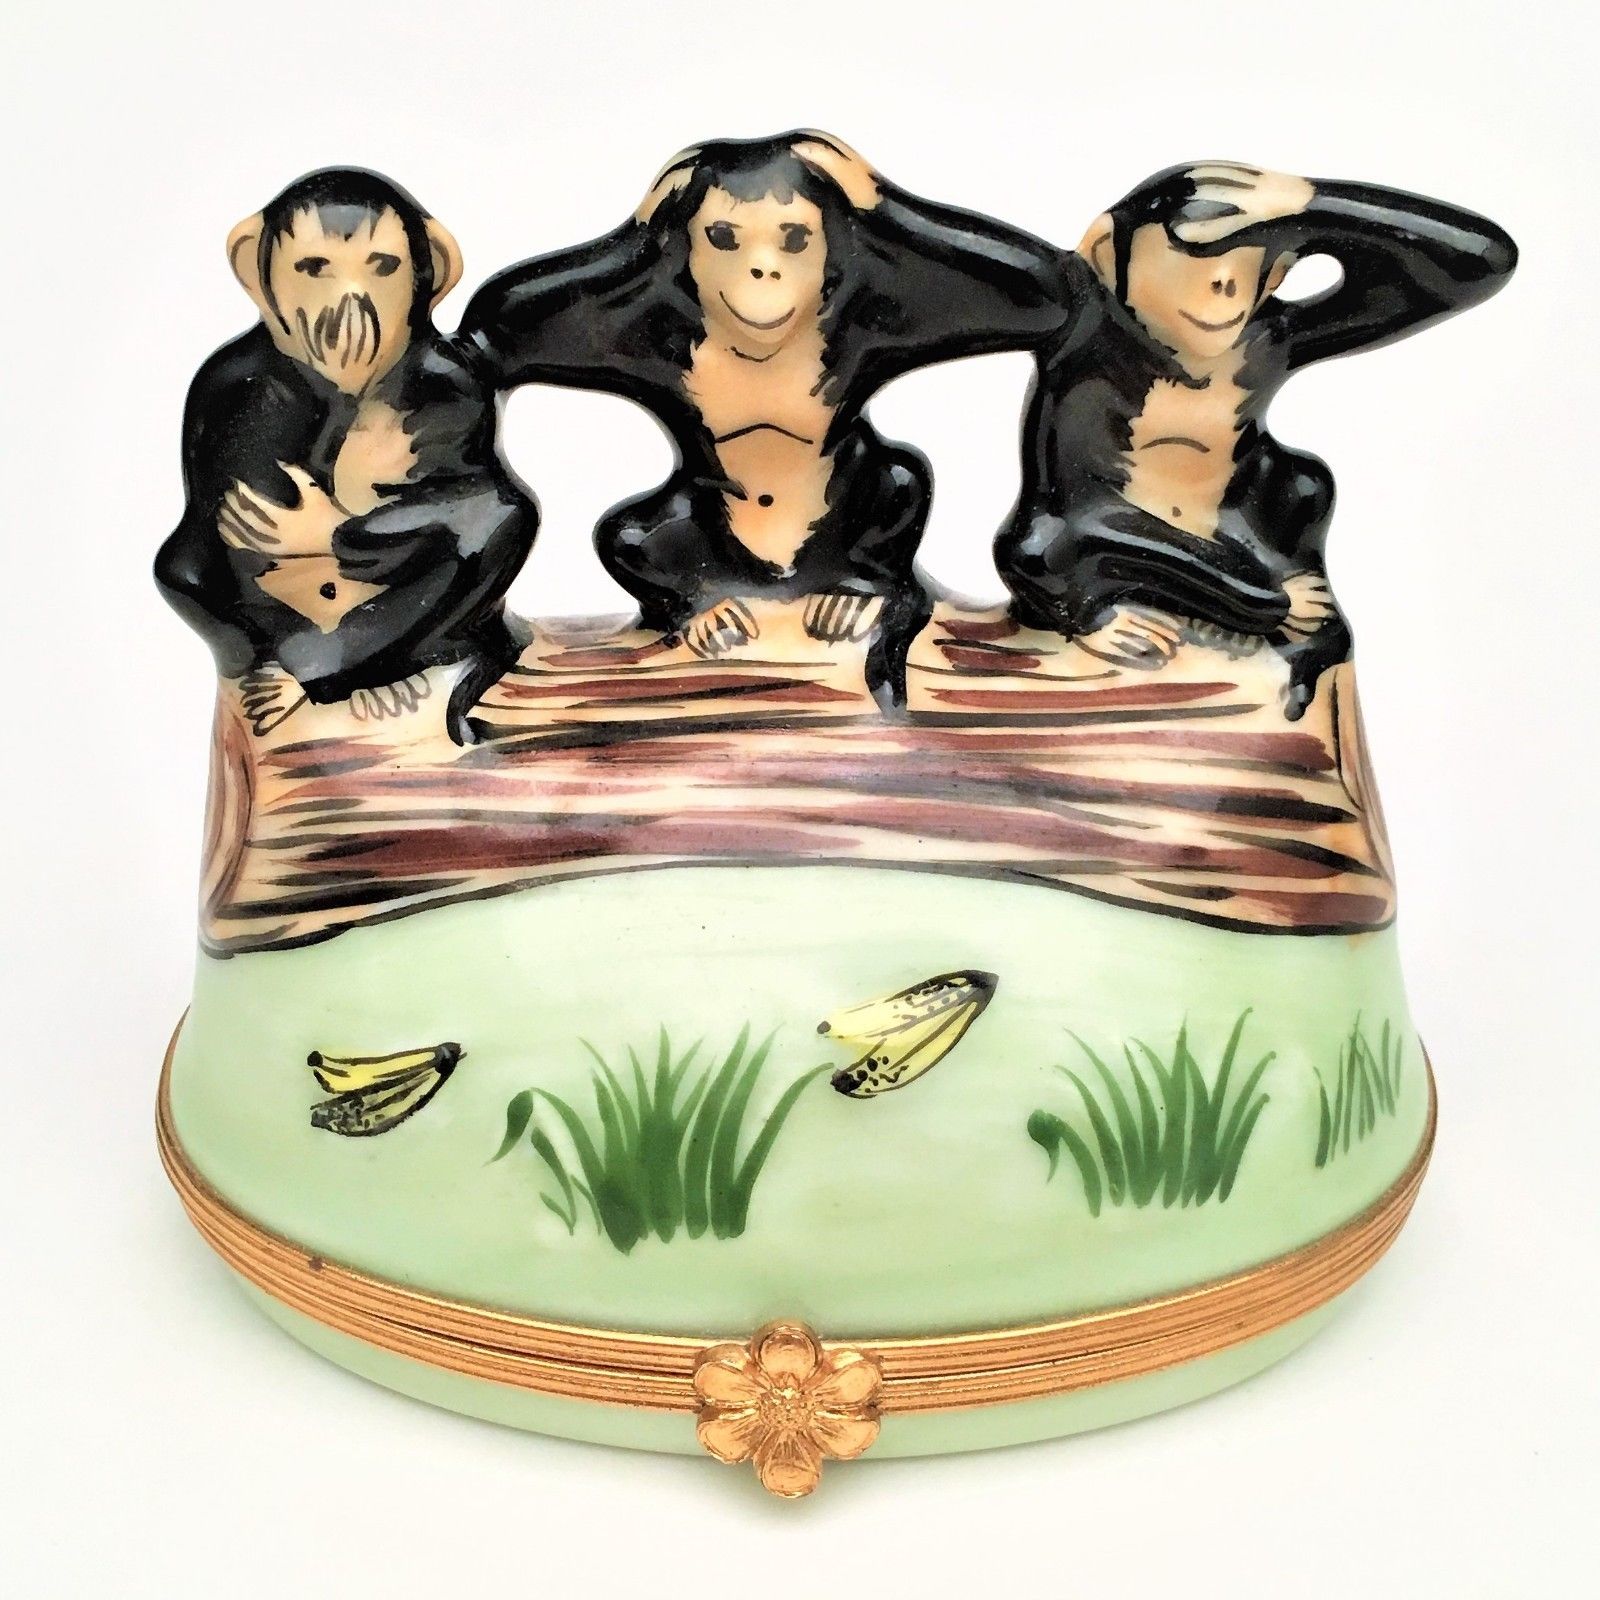 The Three Wise Monkeys Limoges Box by Artoria - Signed "JG" & Numbered #267